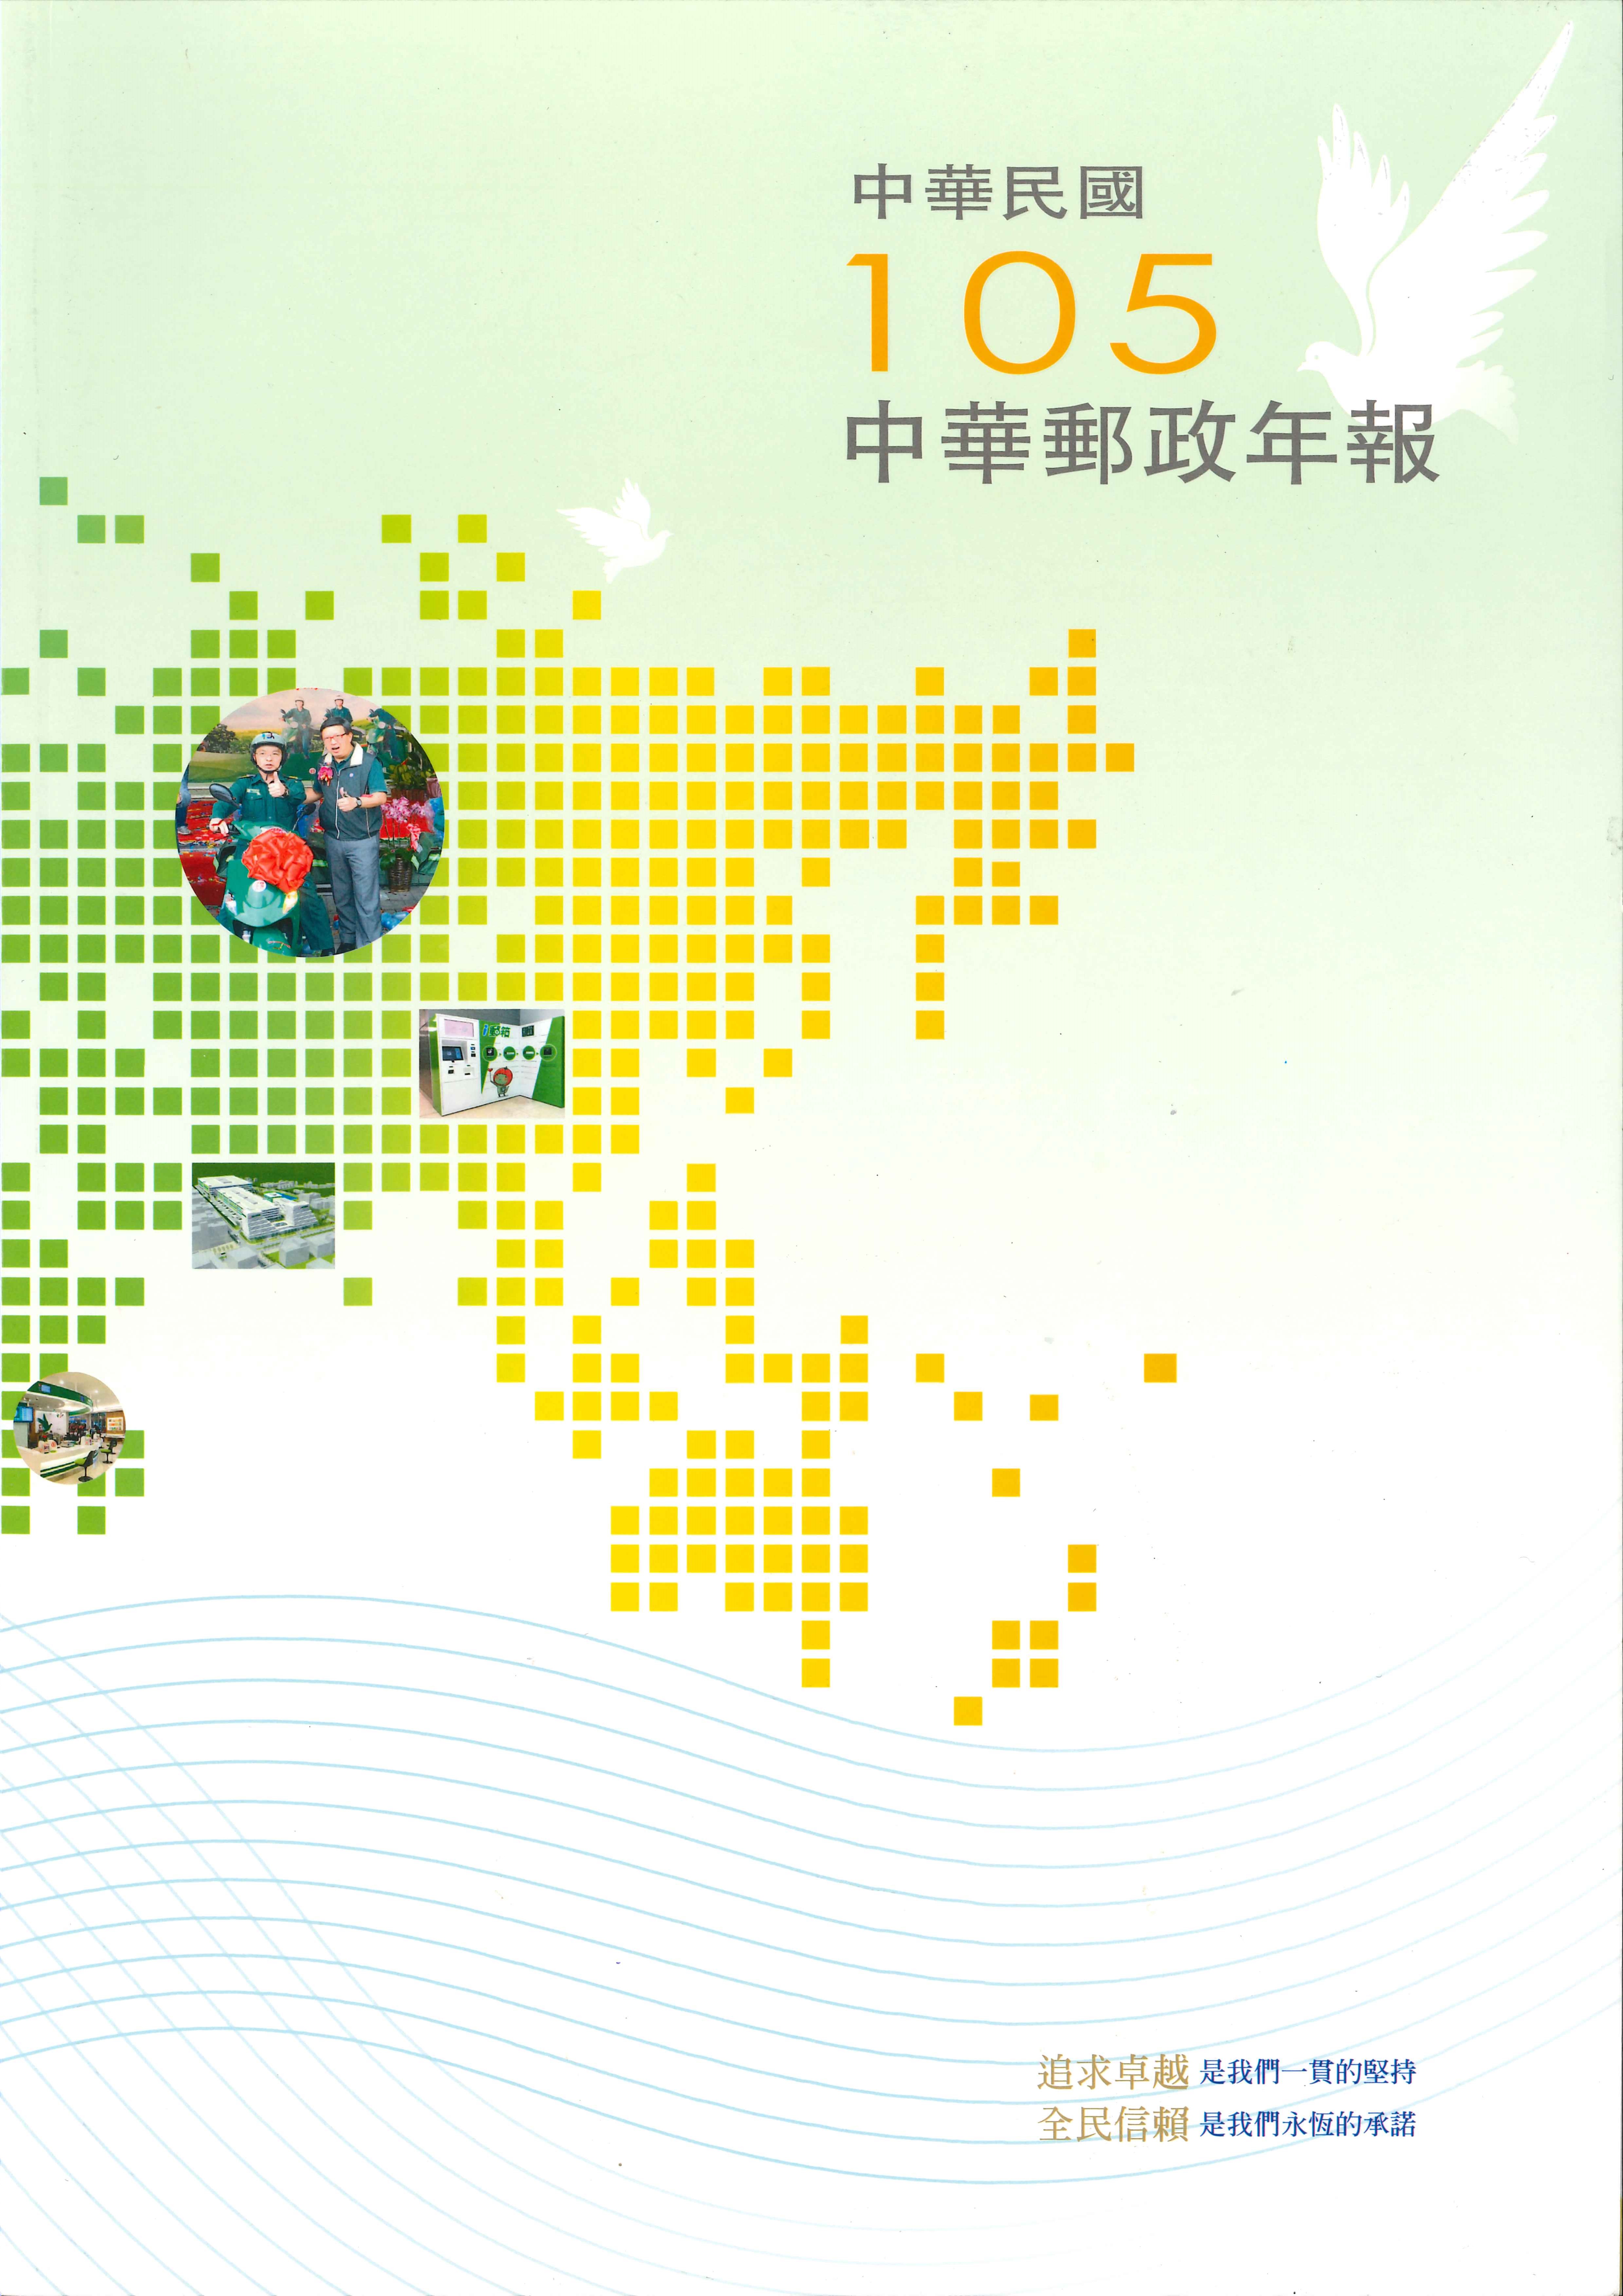 Annual Report of Chunghwa Post 2016